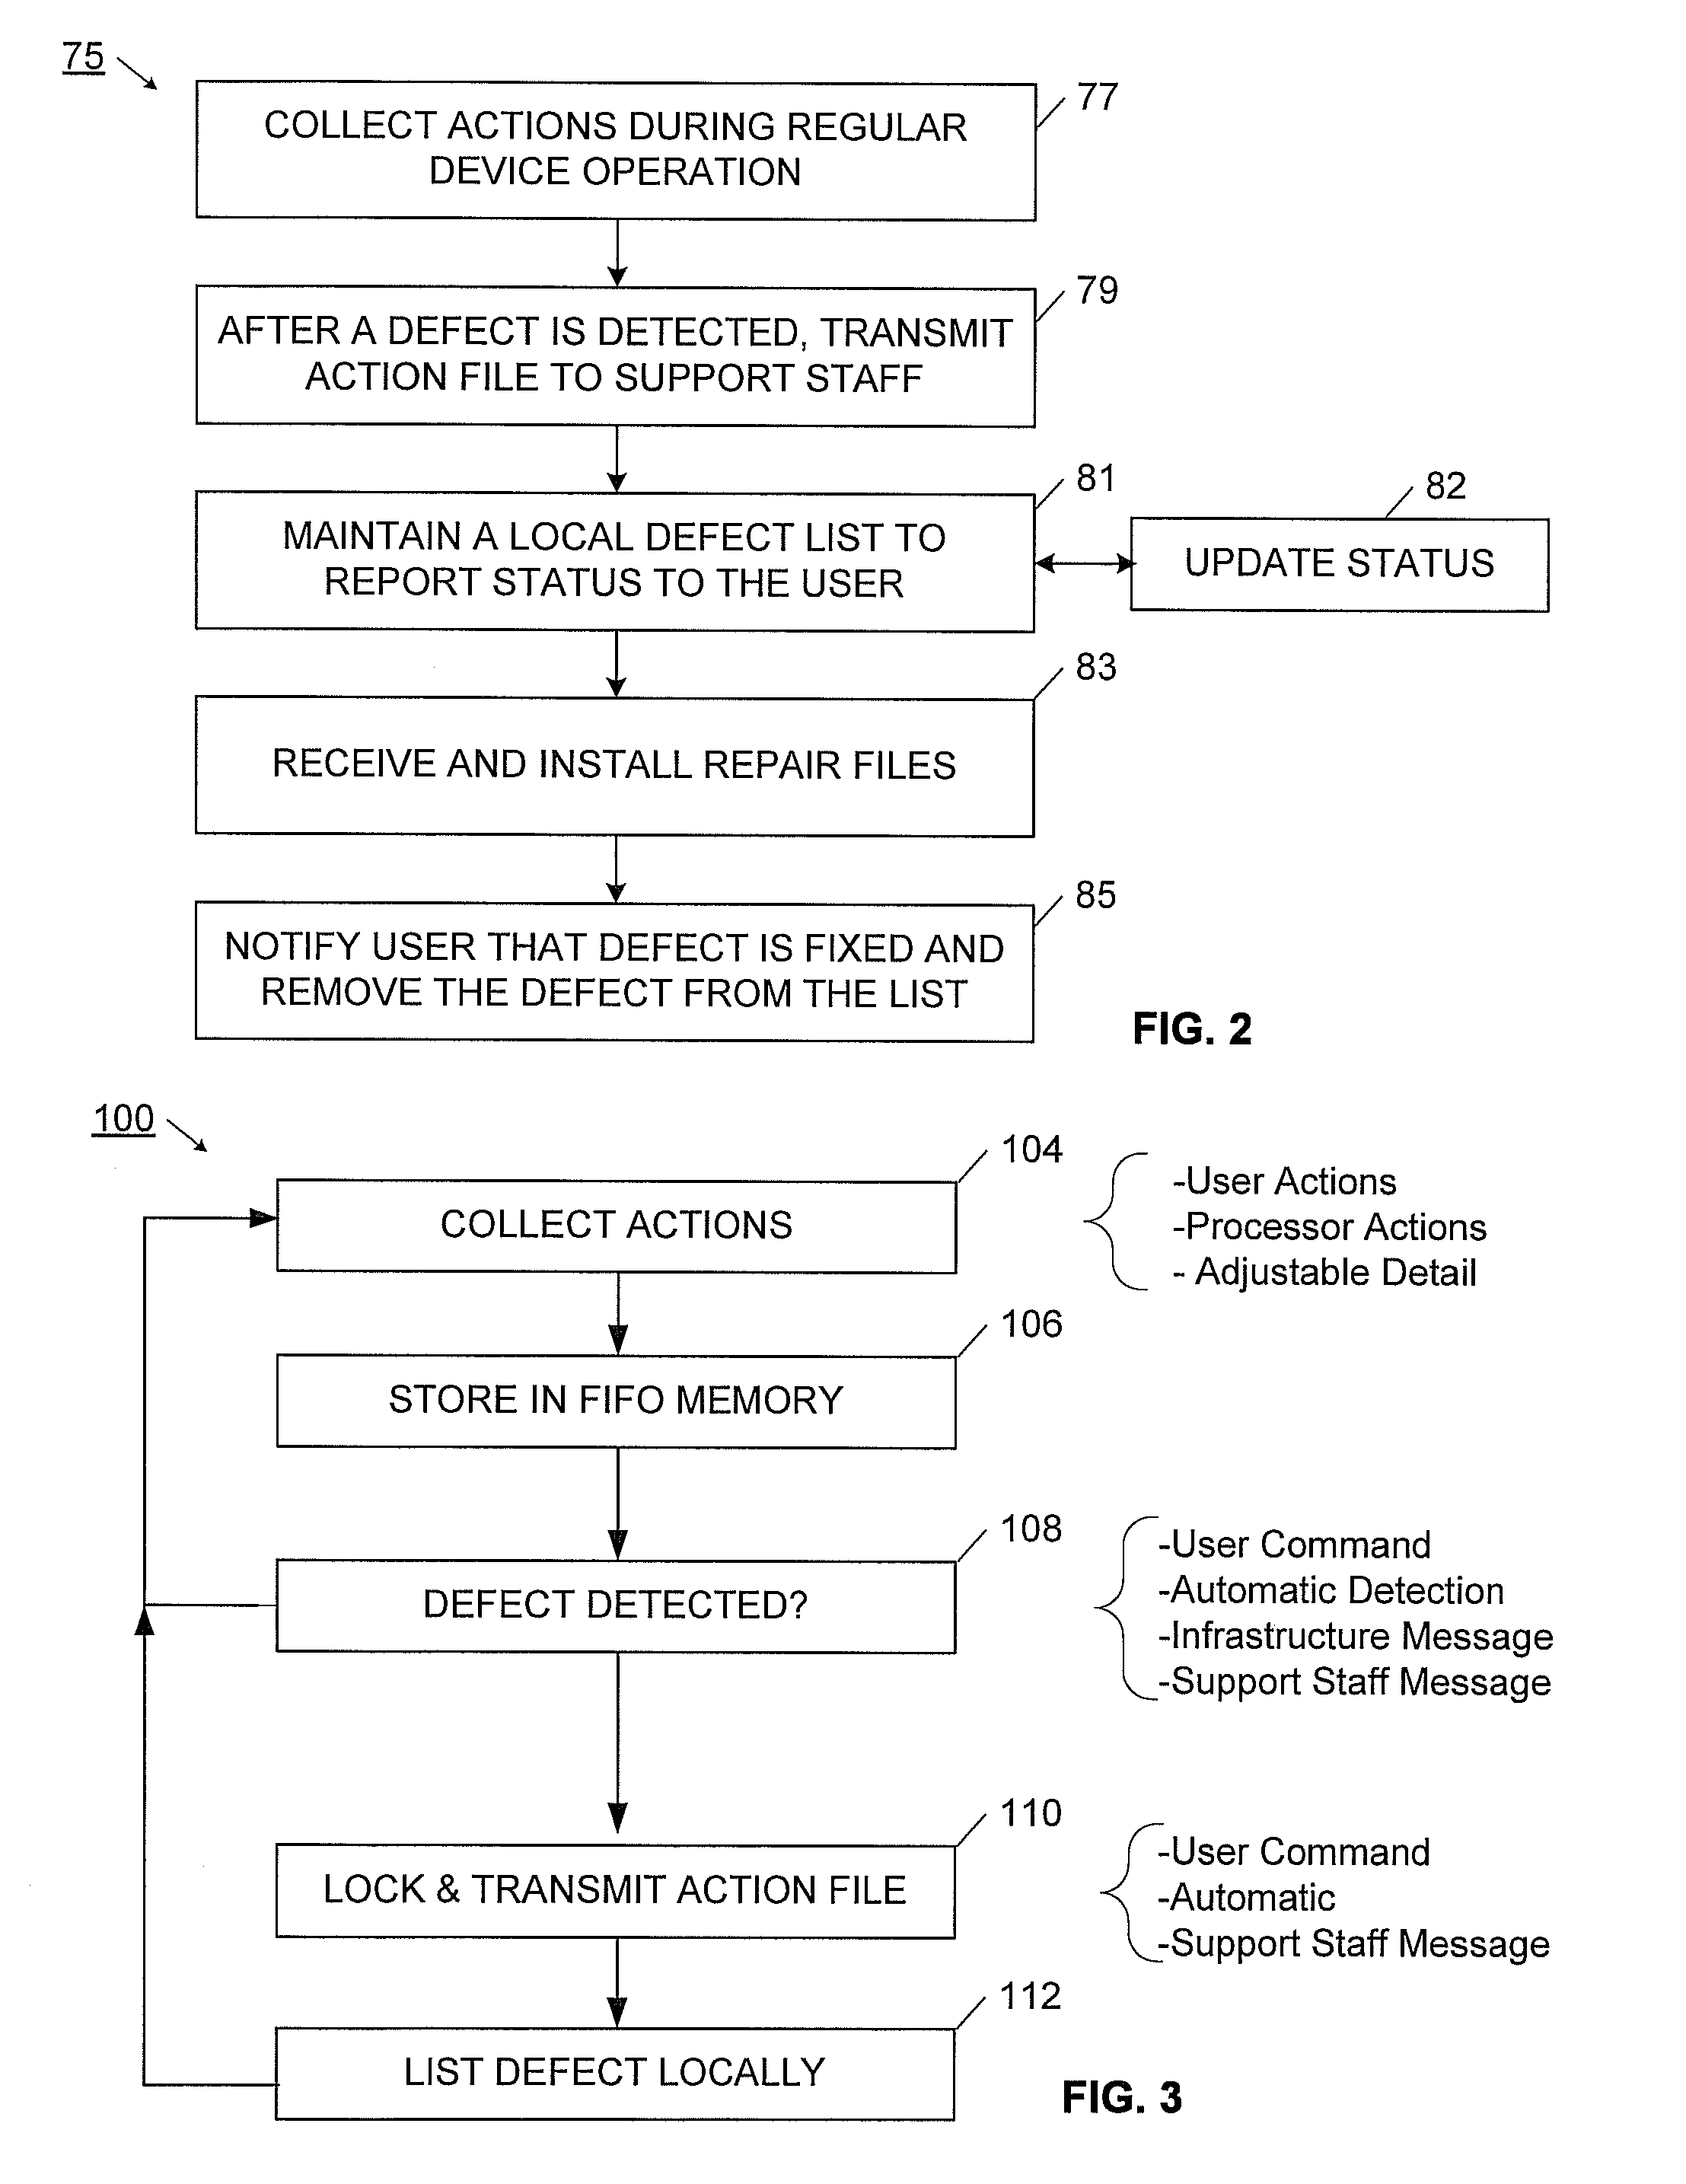 System and method for detecting, reporting, and repairing of software defects for a wireless device